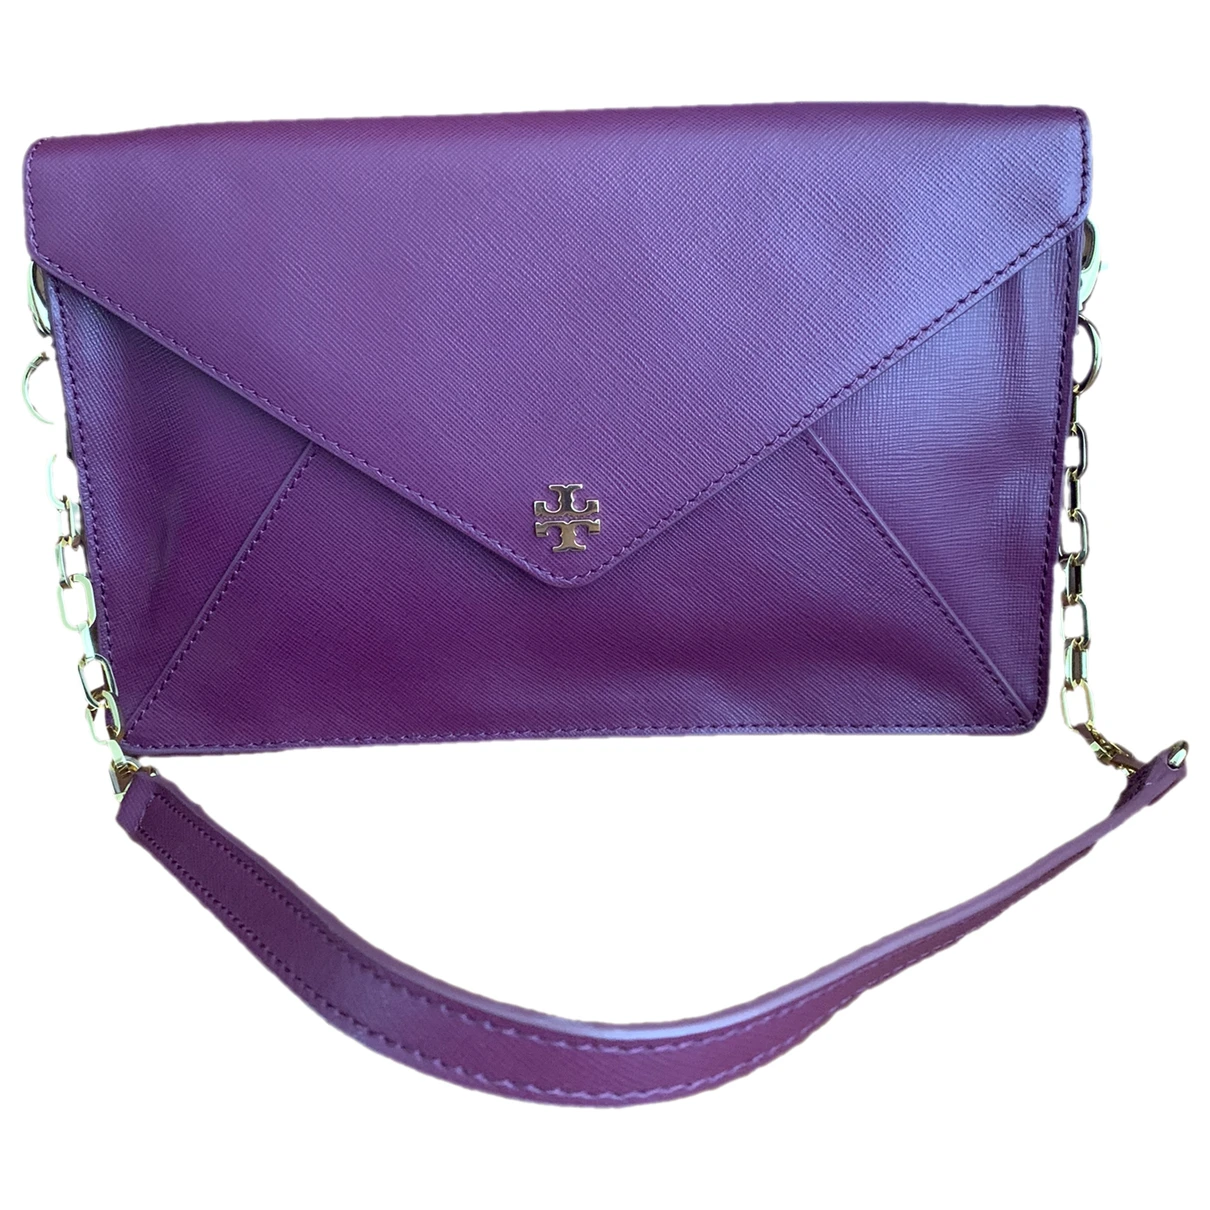 Pre-owned Tory Burch Leather Handbag In Purple